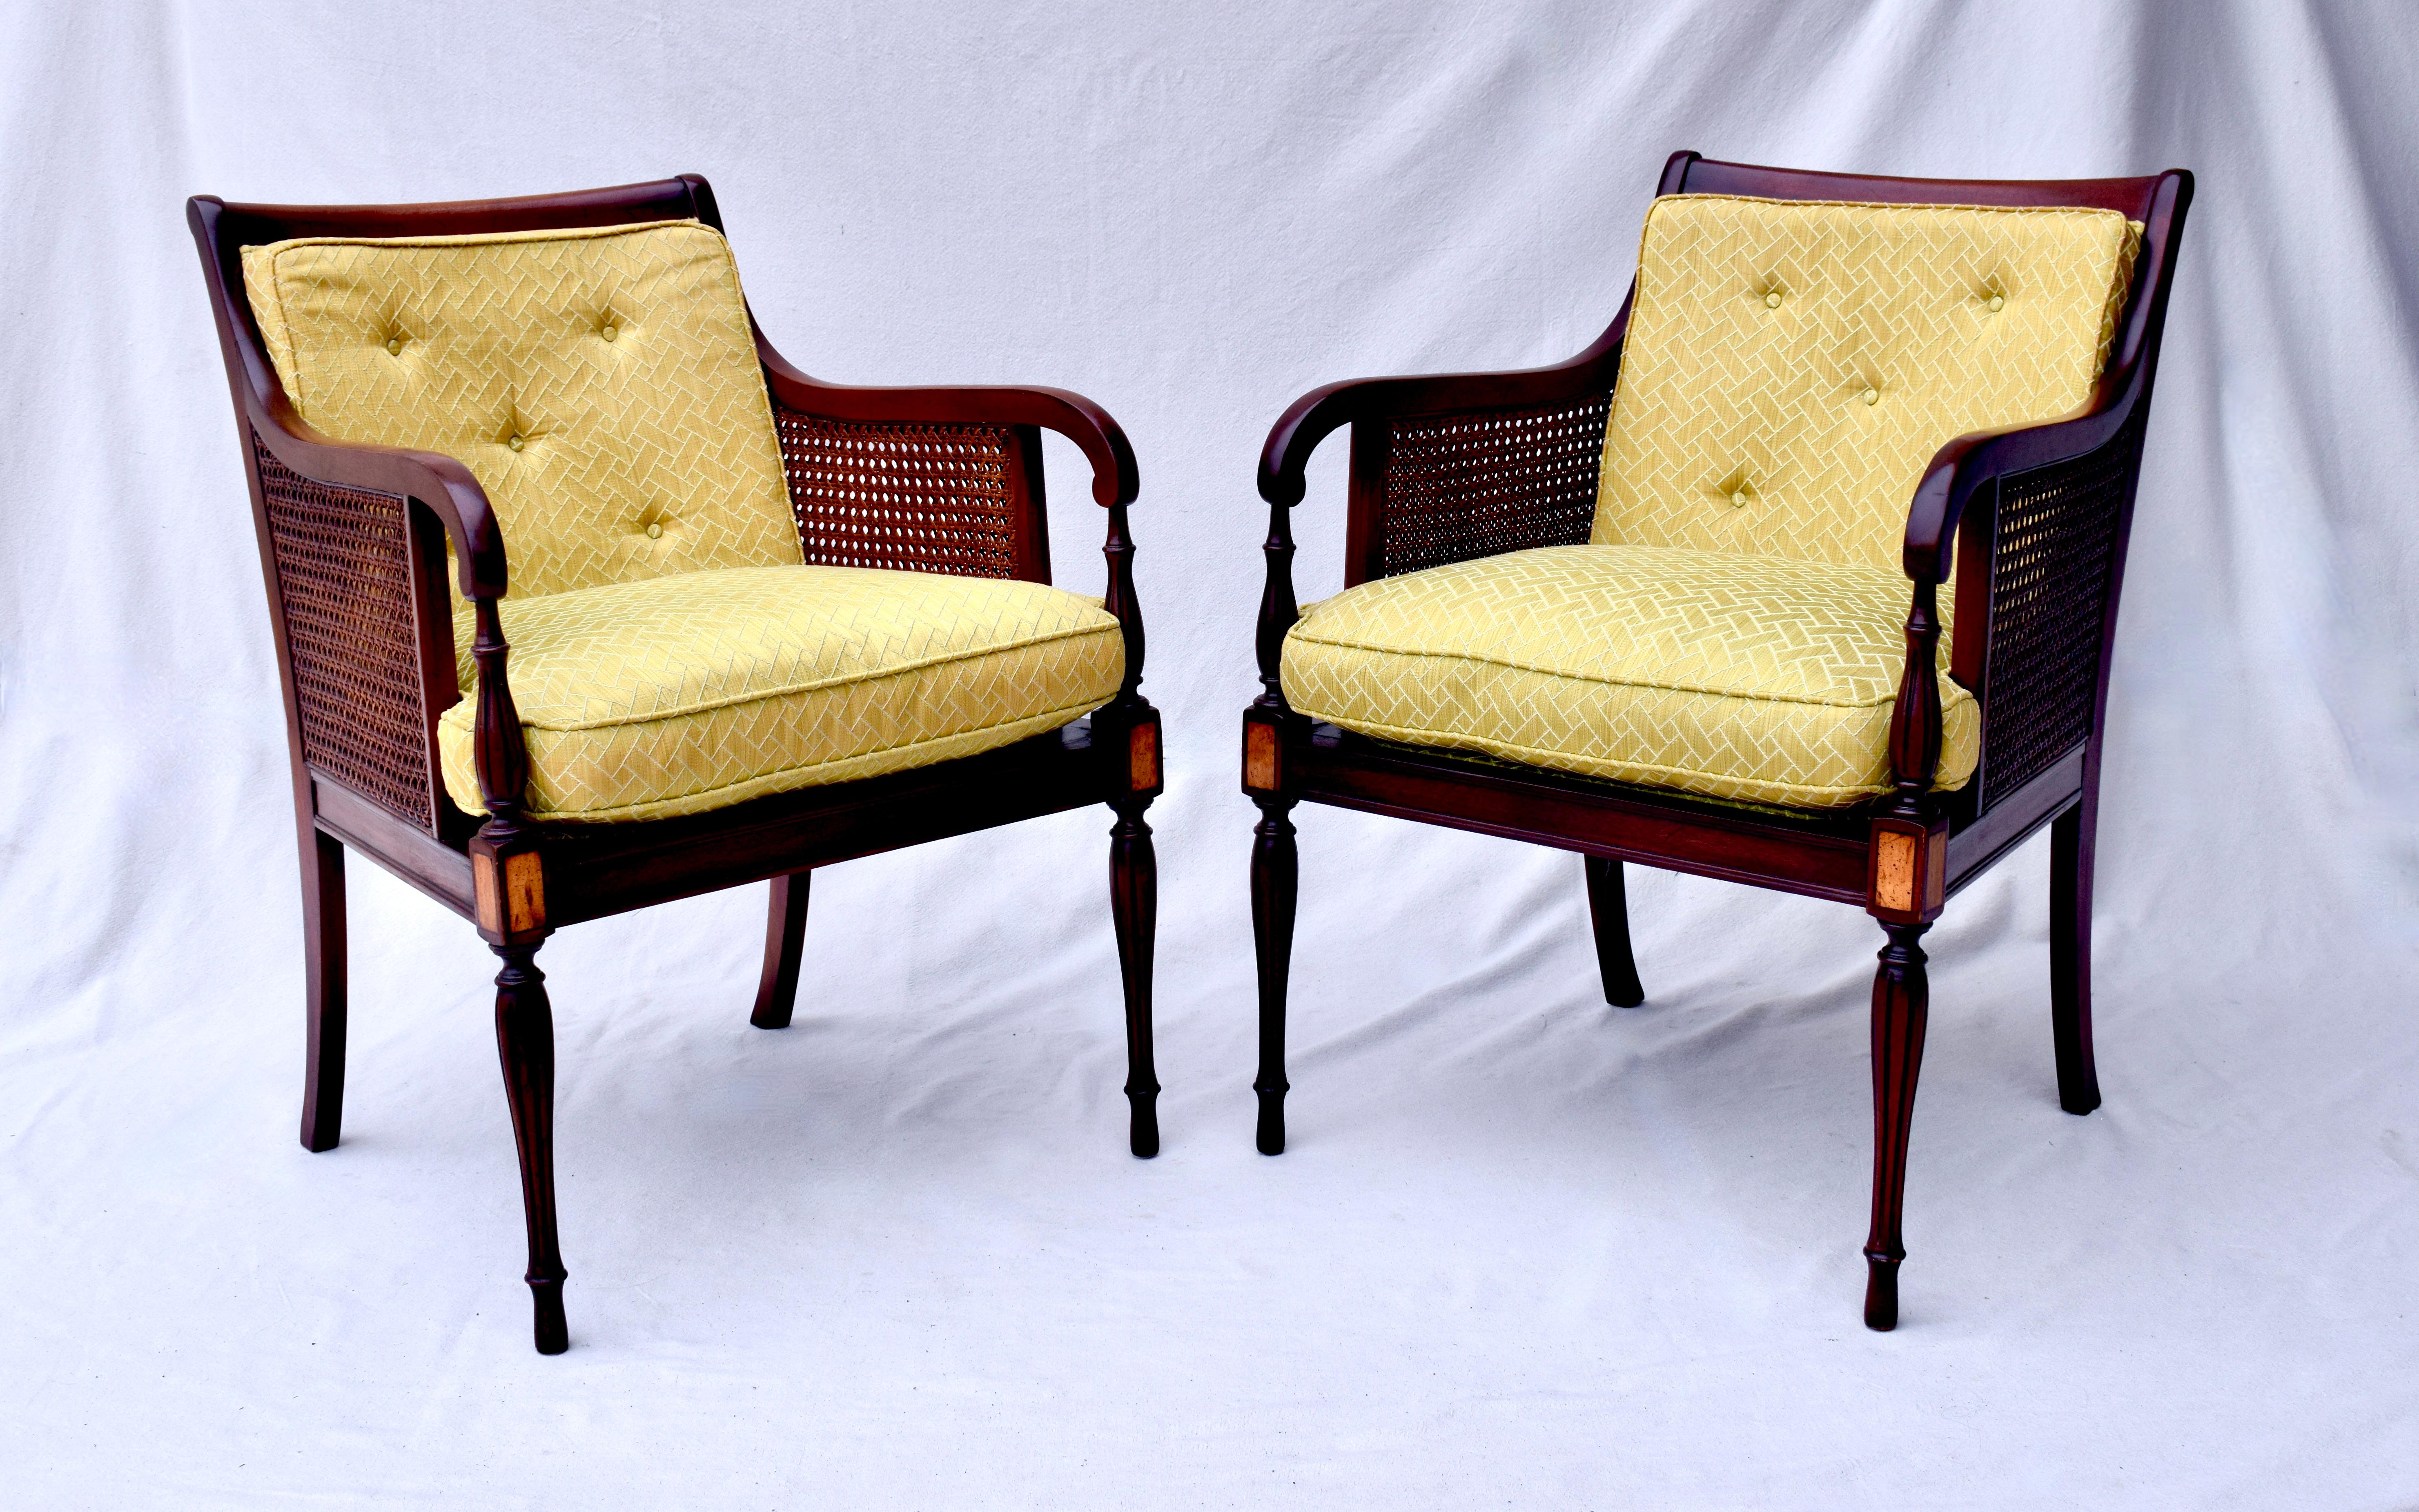 20th Century Hickory Chair Regency Style Double Caned Chairs